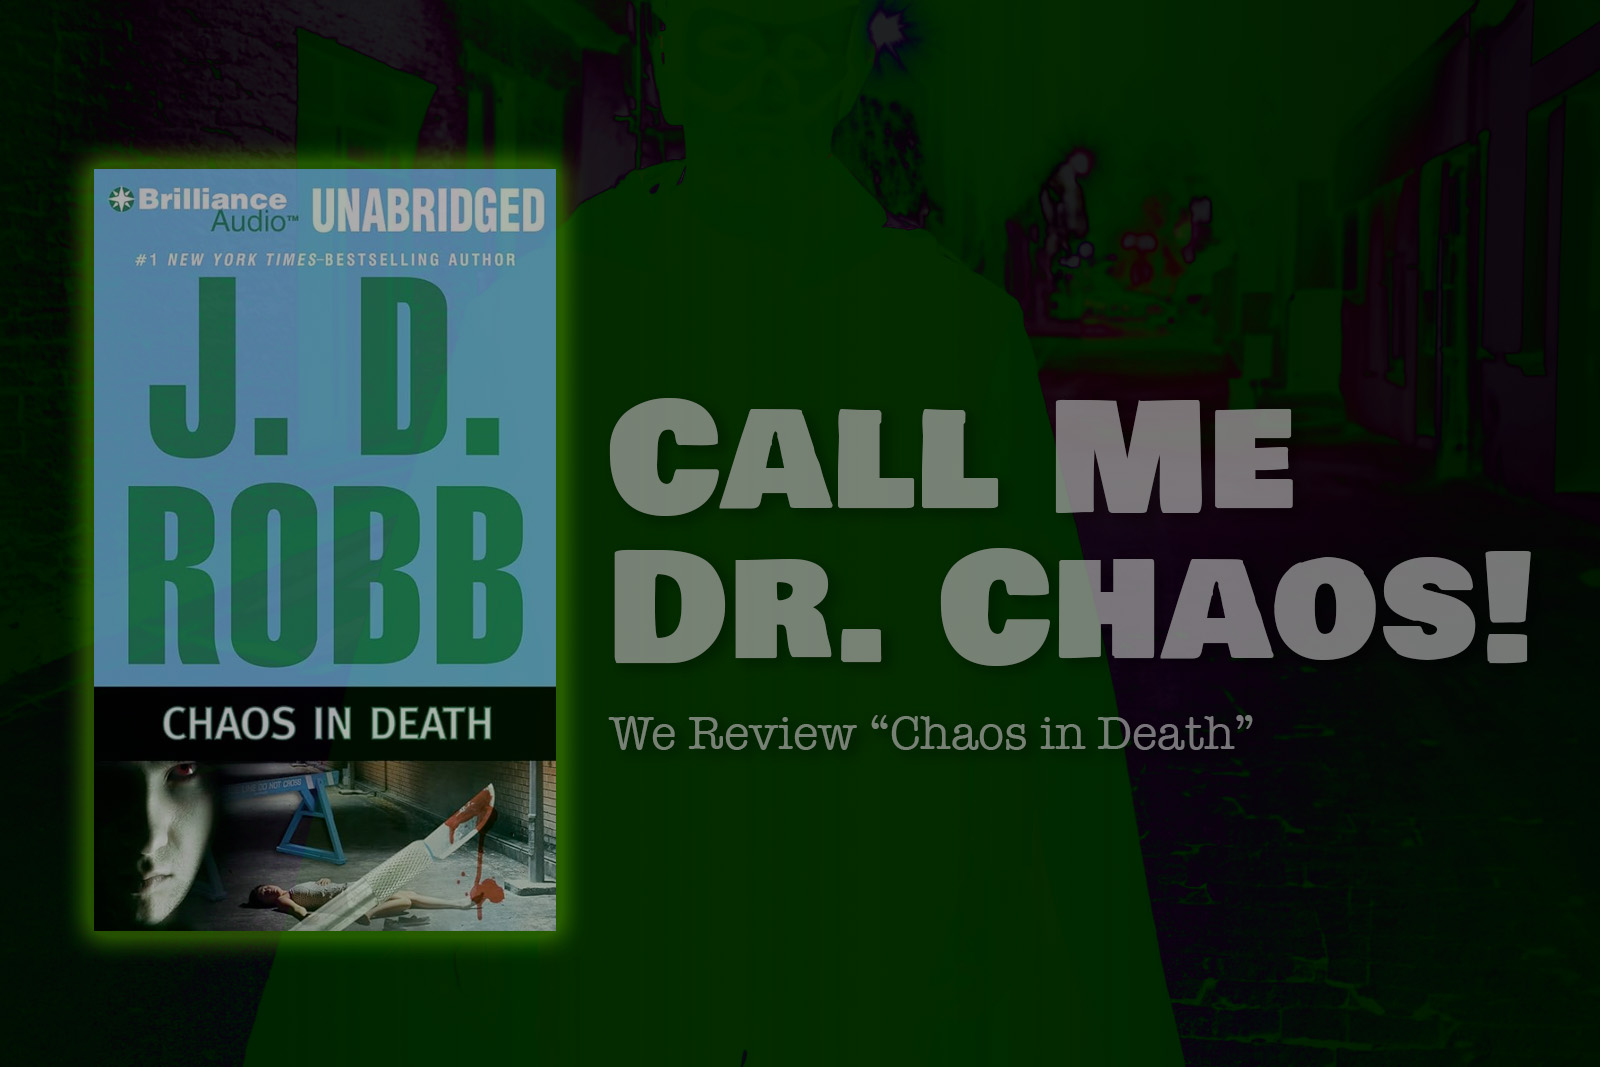 Call Me Dr. Chaos! We Review “Chaos in Death”